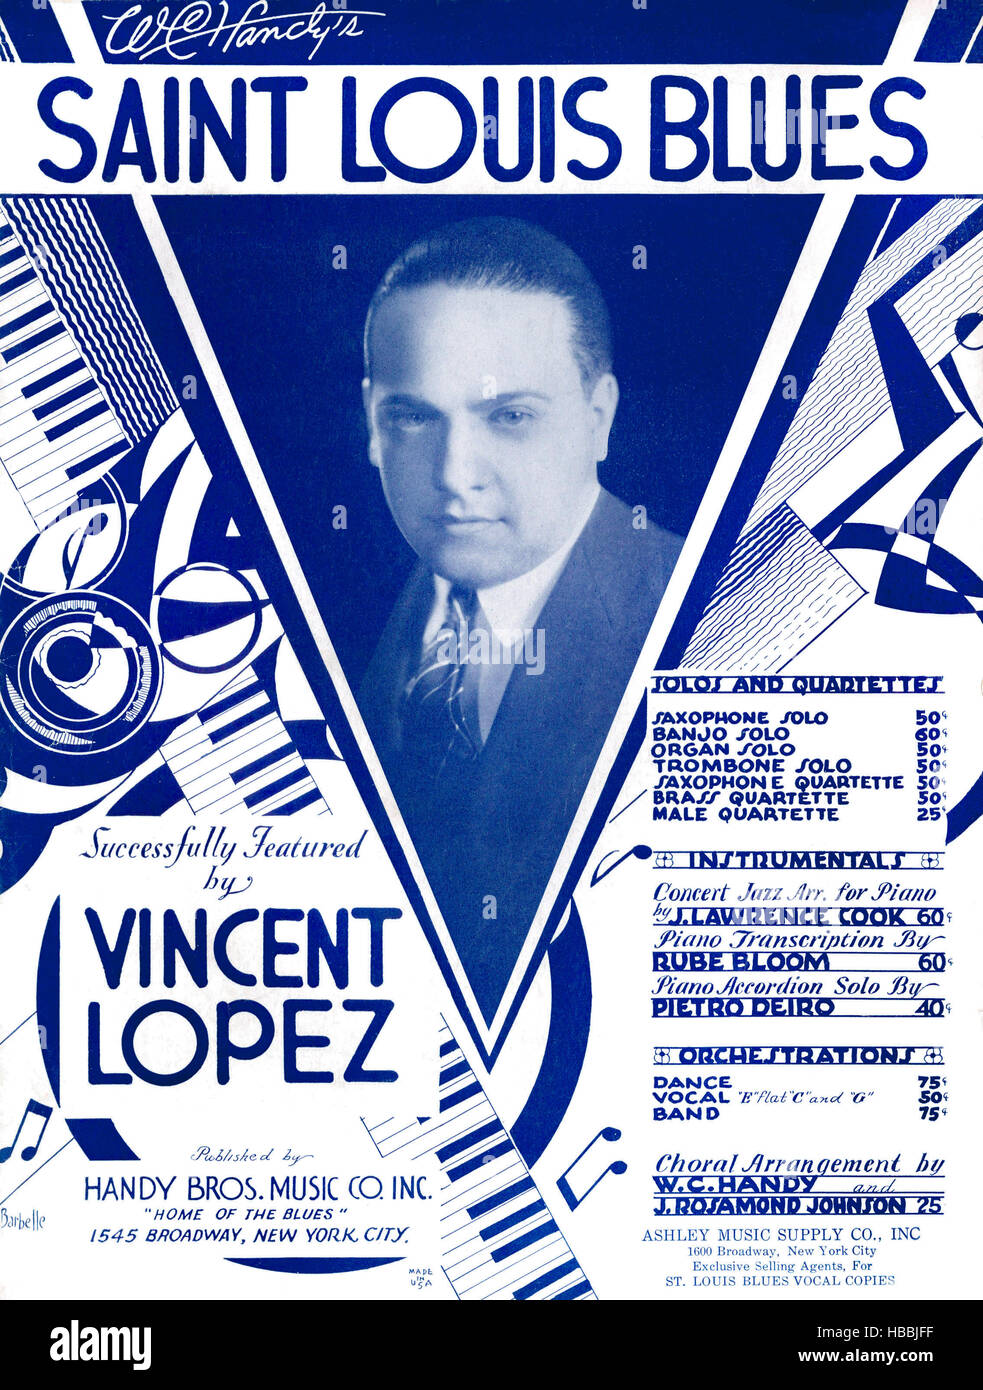 The Saint Louis Blues, sheet music by W.C. Handy, as performed by Vincent Lopez (pictured), circa 1920s. Stock Photo